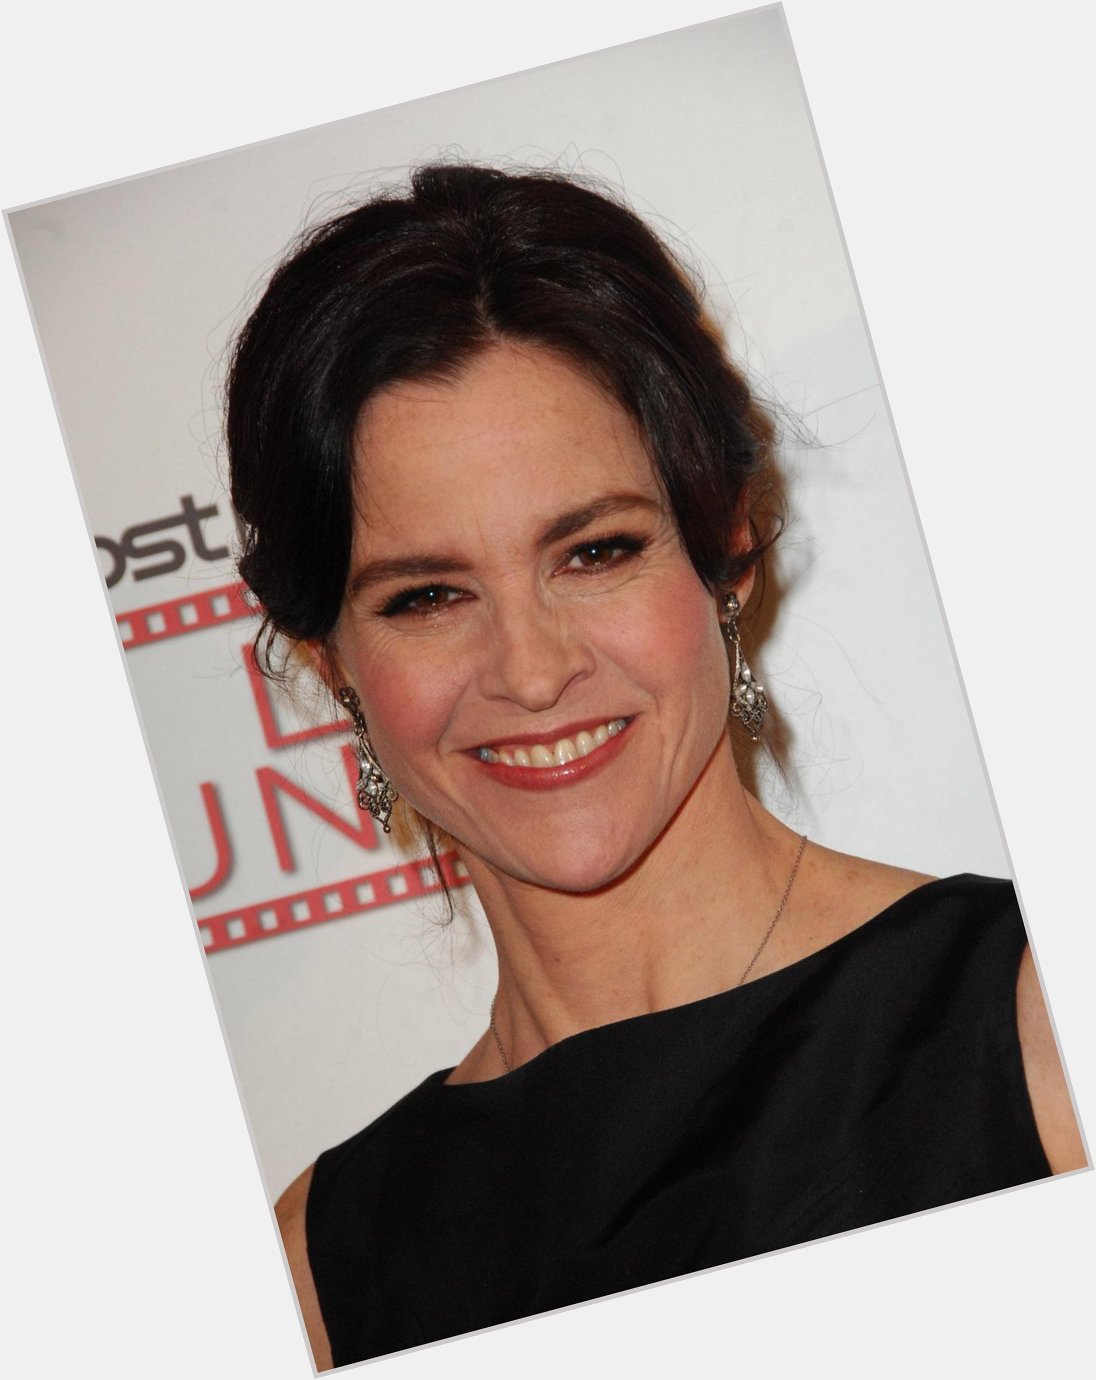 FIRST message HAPPY BIRTHDAY to Ally Sheedy today.Wonderful actress.God bless you. 